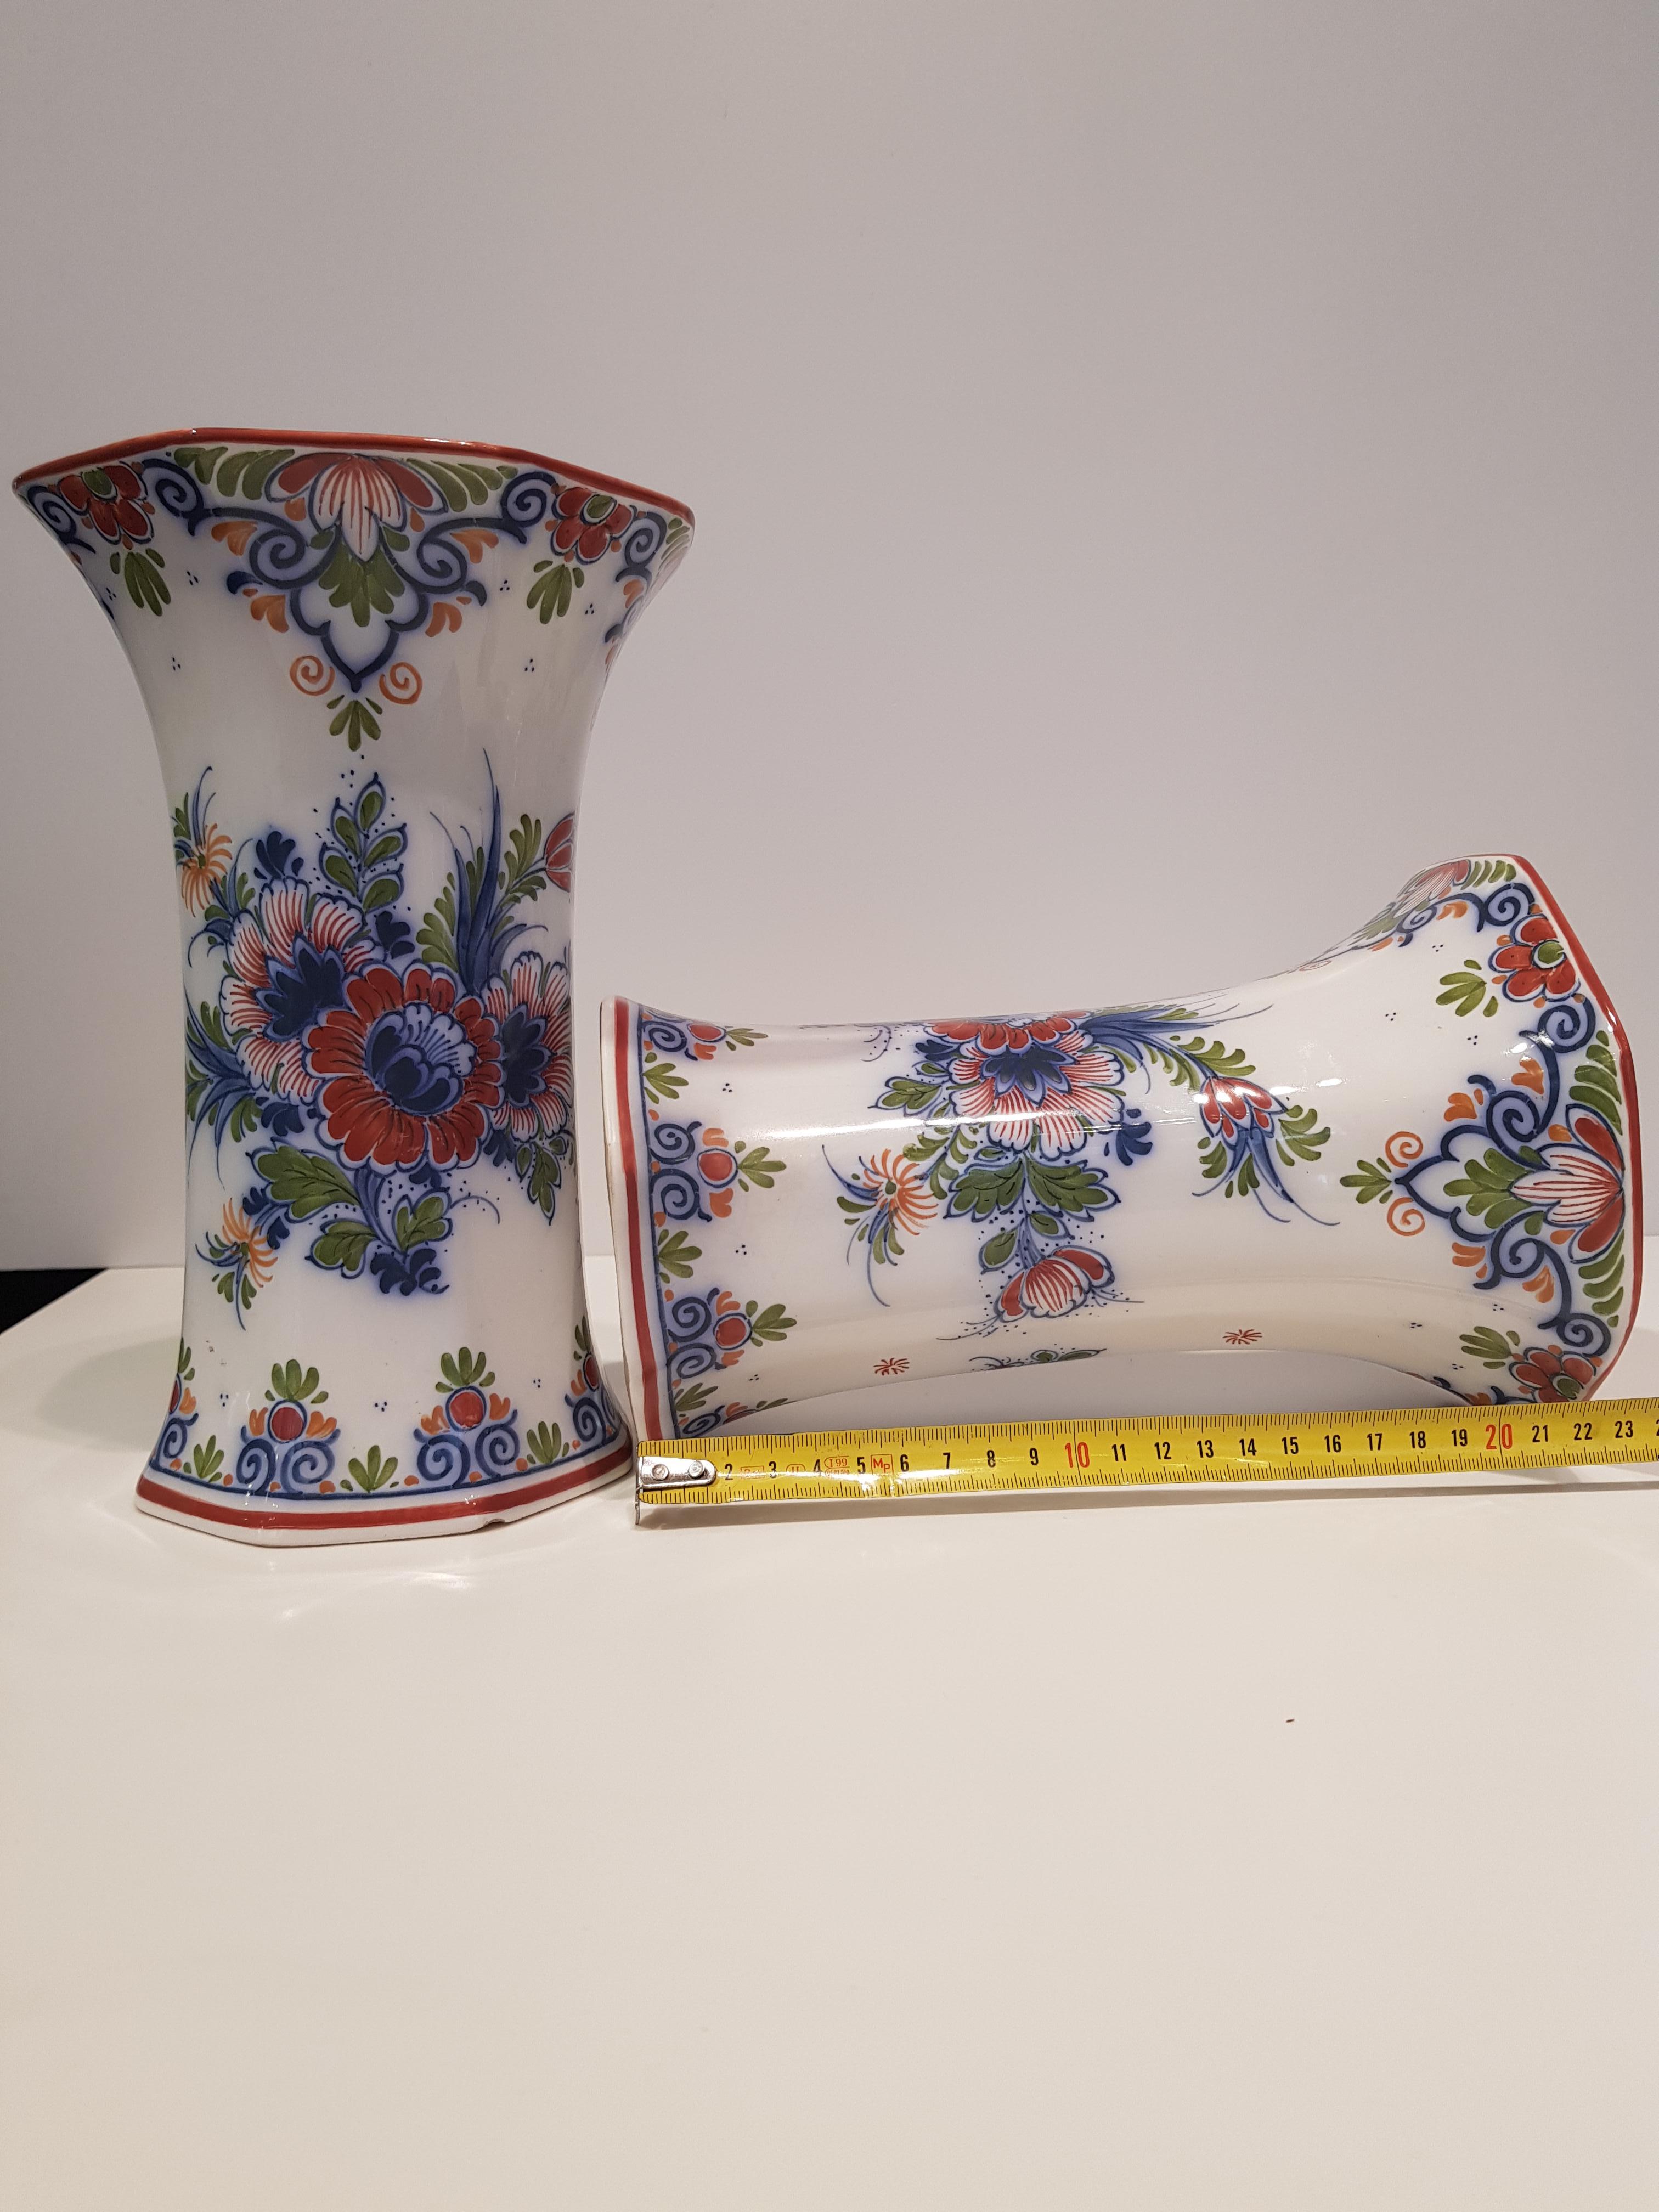 Pair of Zenith Gouda vases in 4 colors of the 1960s, hand painted by Gouda (Netherlands). These are vases with a spectacular floral pallet in the center, with bright colors on the classic Delft ivory background.
Its primary trait is the